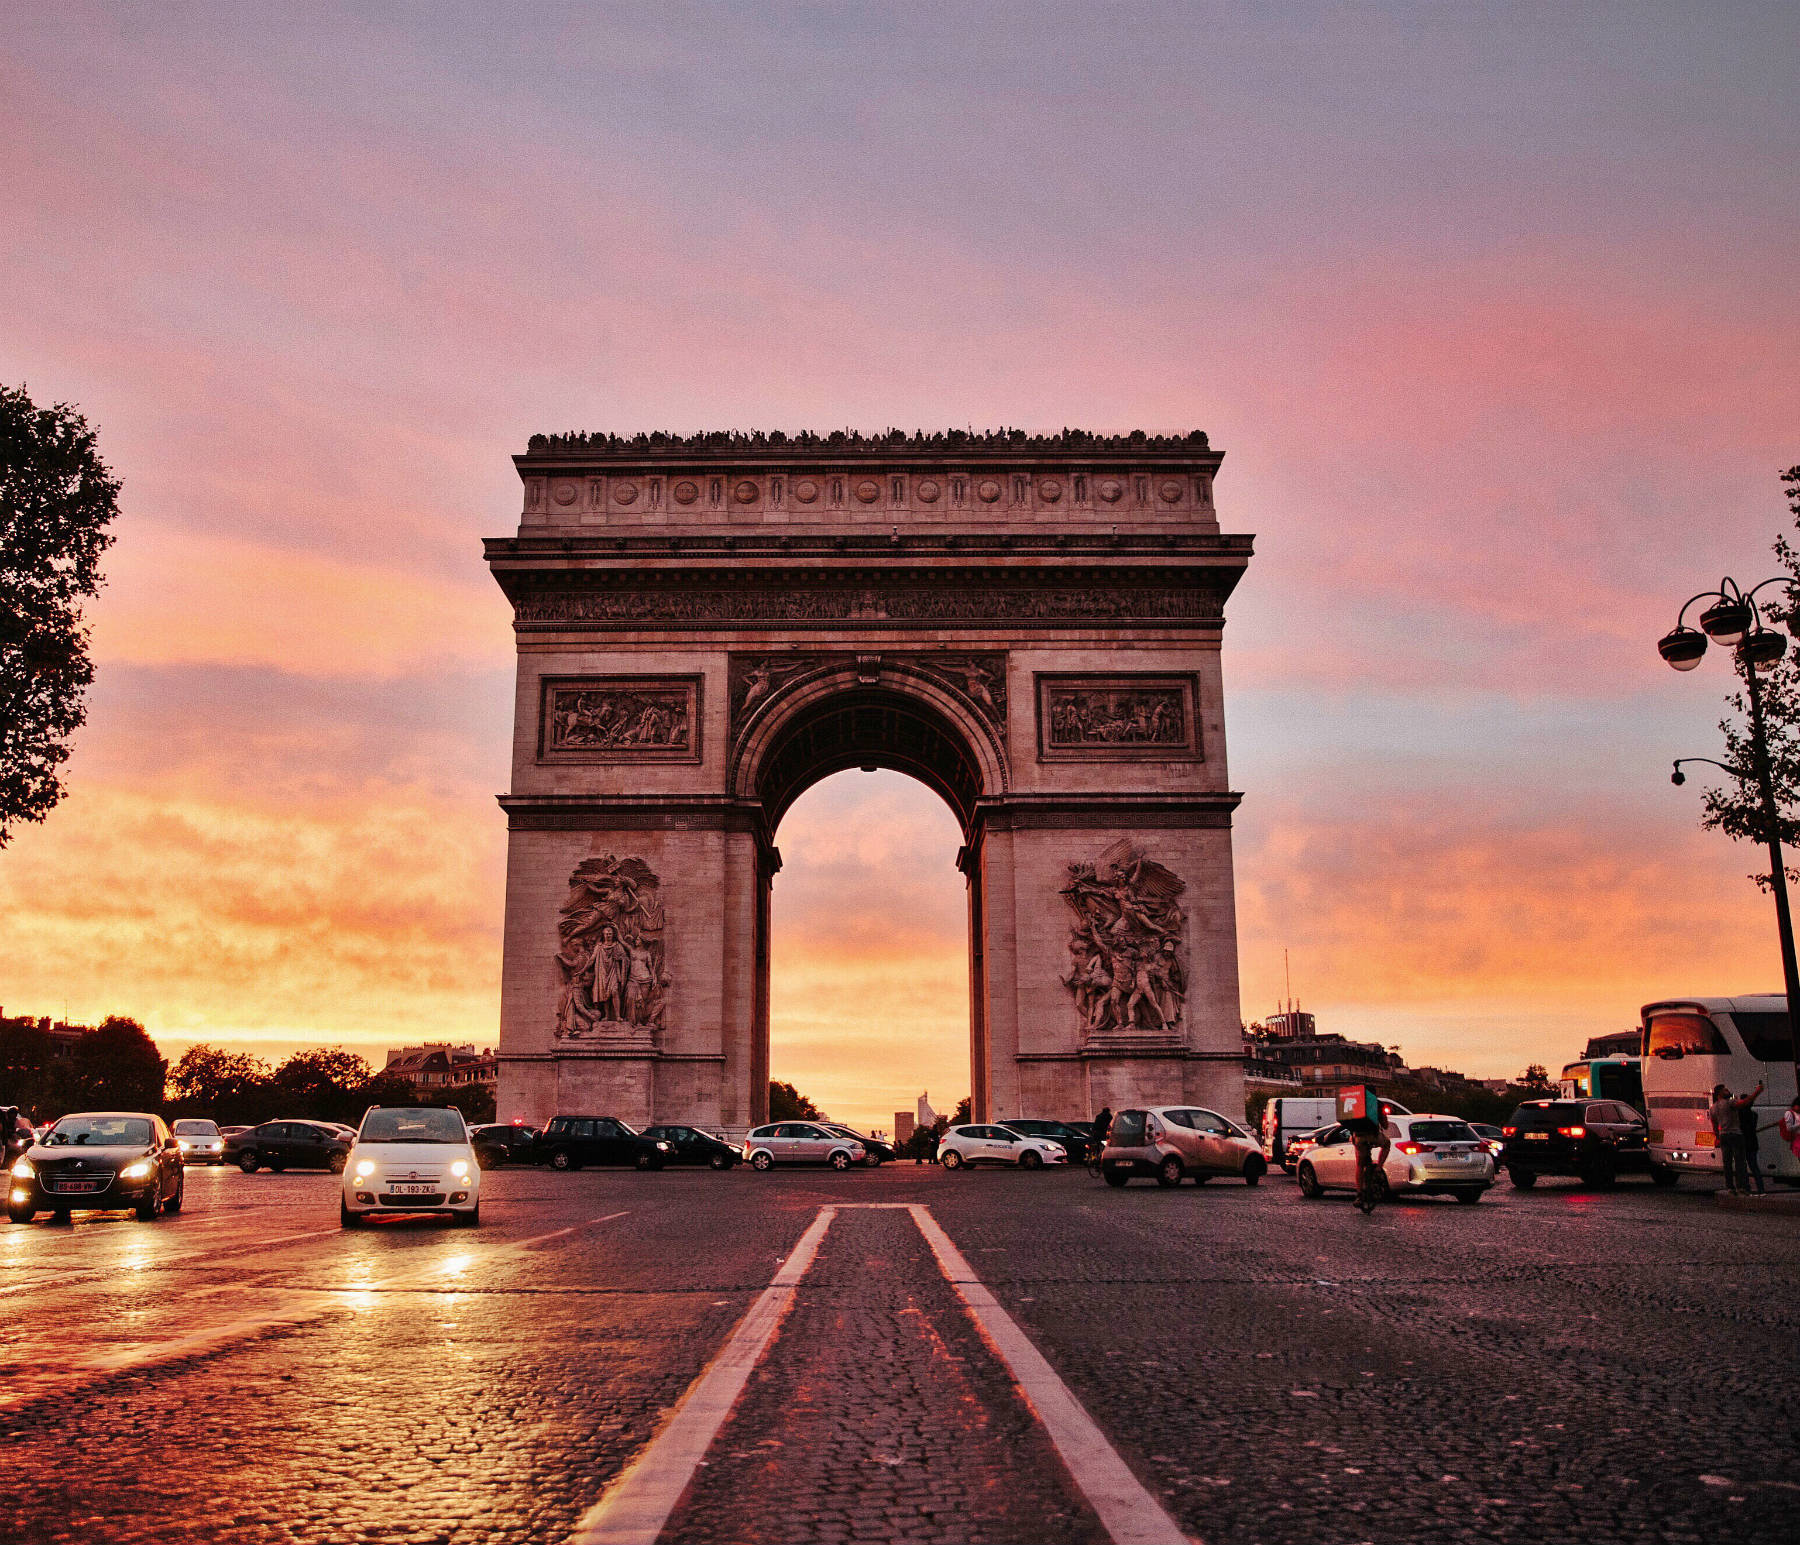 Pink and orange sunset at the Arc de Triomphe in Paris.